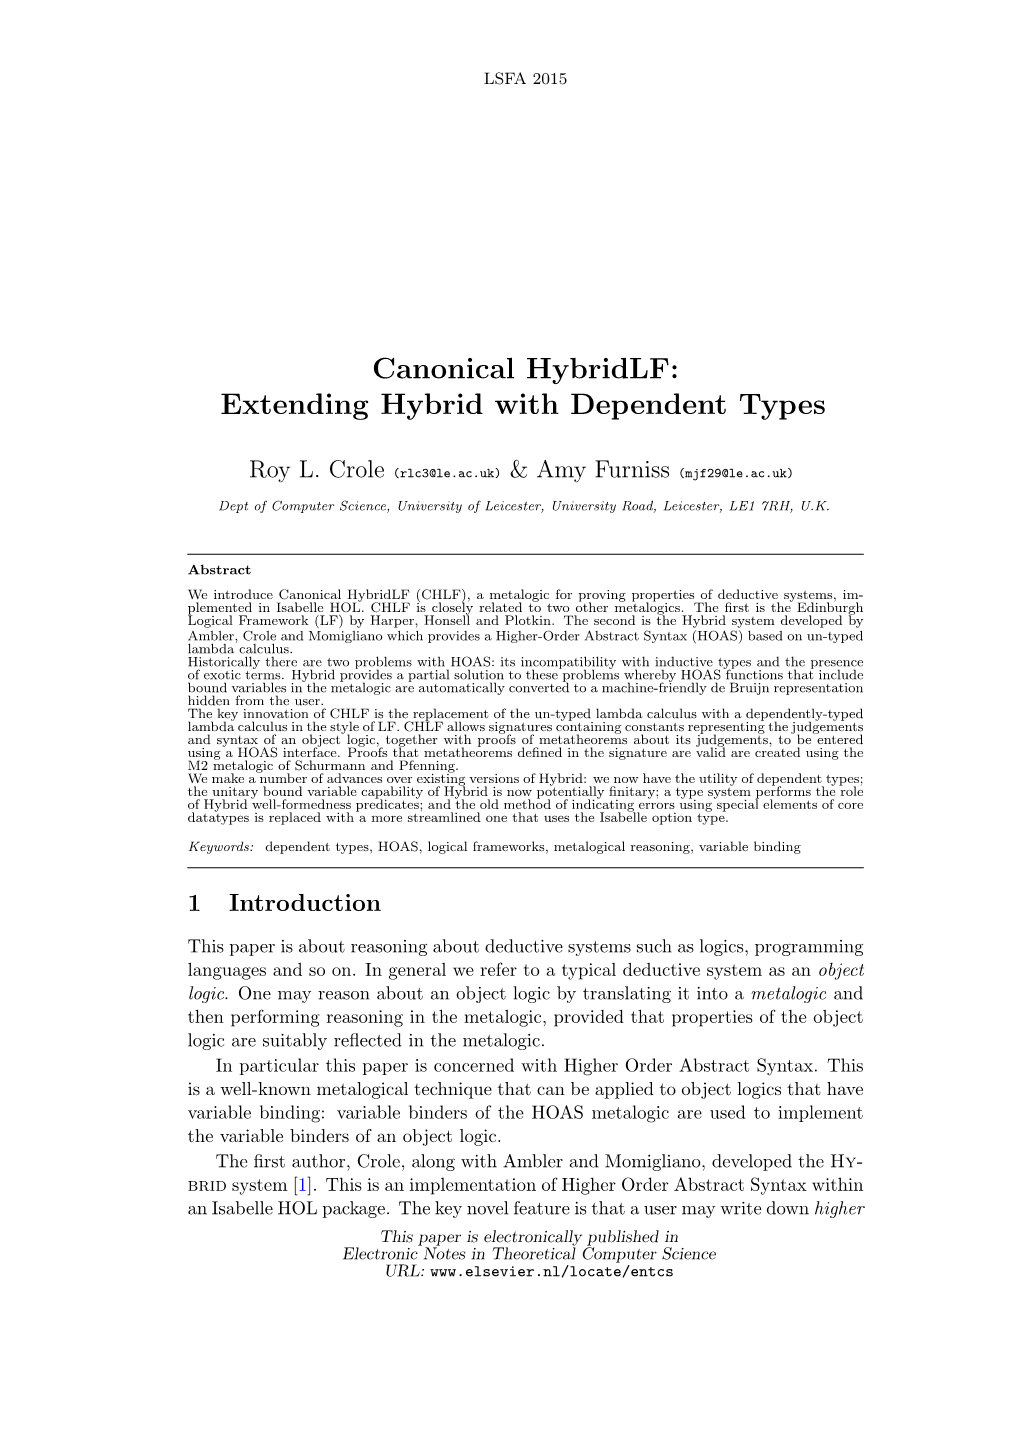 Canonical Hybridlf: Extending Hybrid with Dependent Types